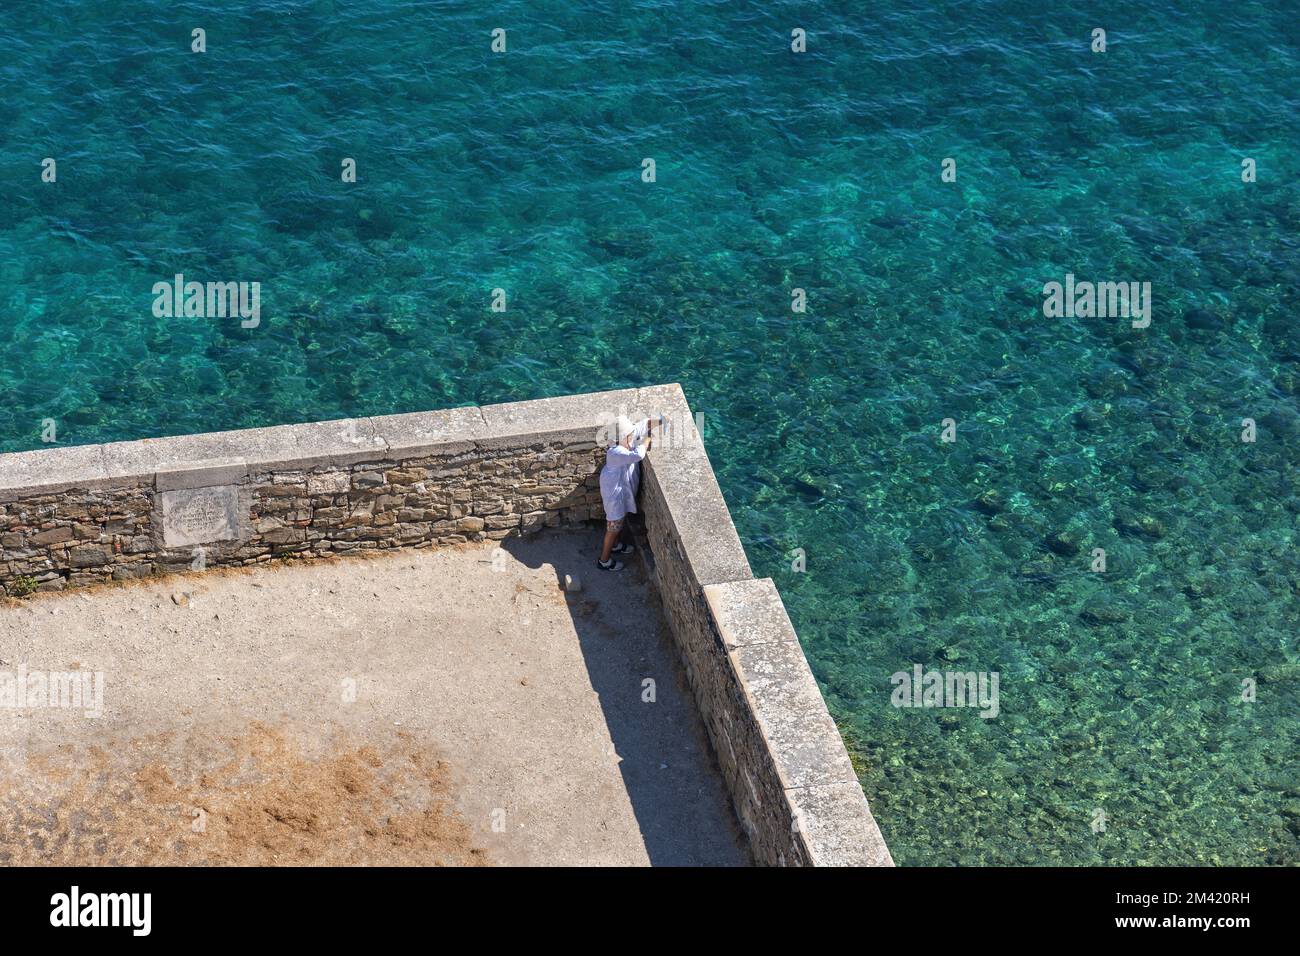 Aerial view of lonely woman tourist taking a picture on terrace overlooking the Adriatic Sea in coastal town of Piran in Slovenia. Stock Photo